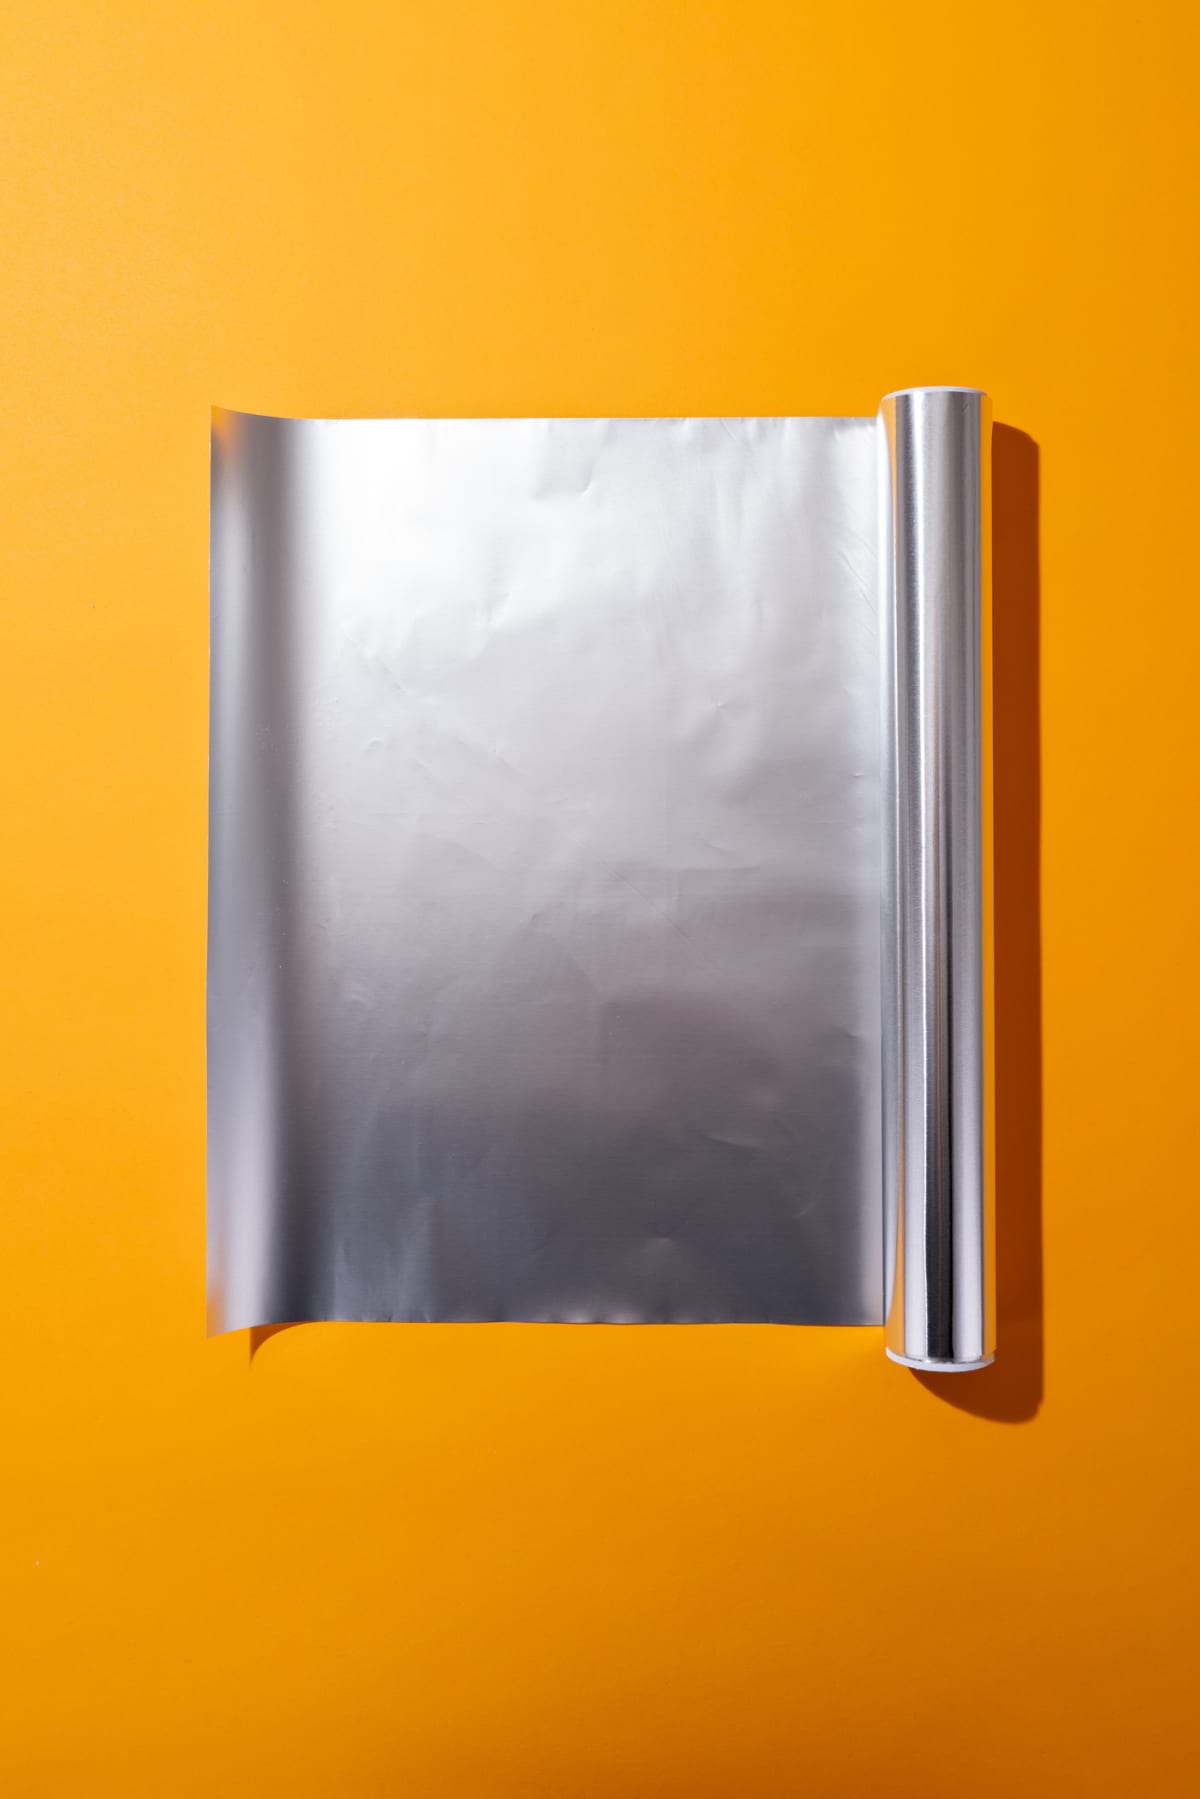 A roll of aluminum foil on an orange background